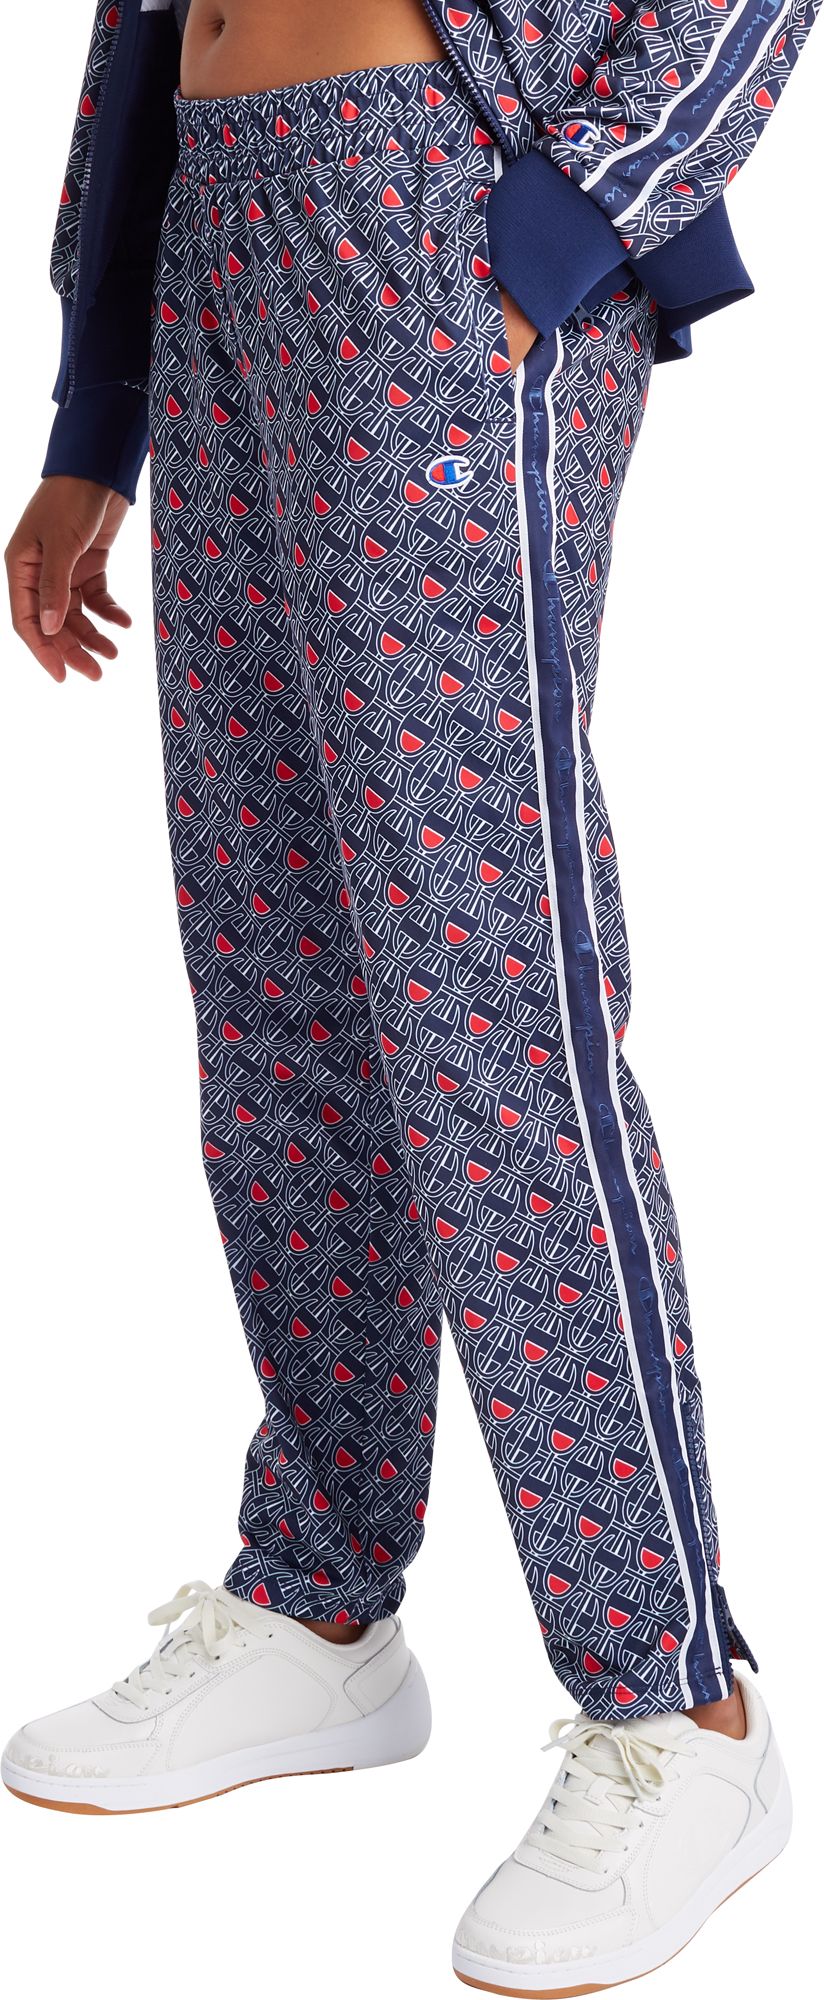 champion all over logo track pants